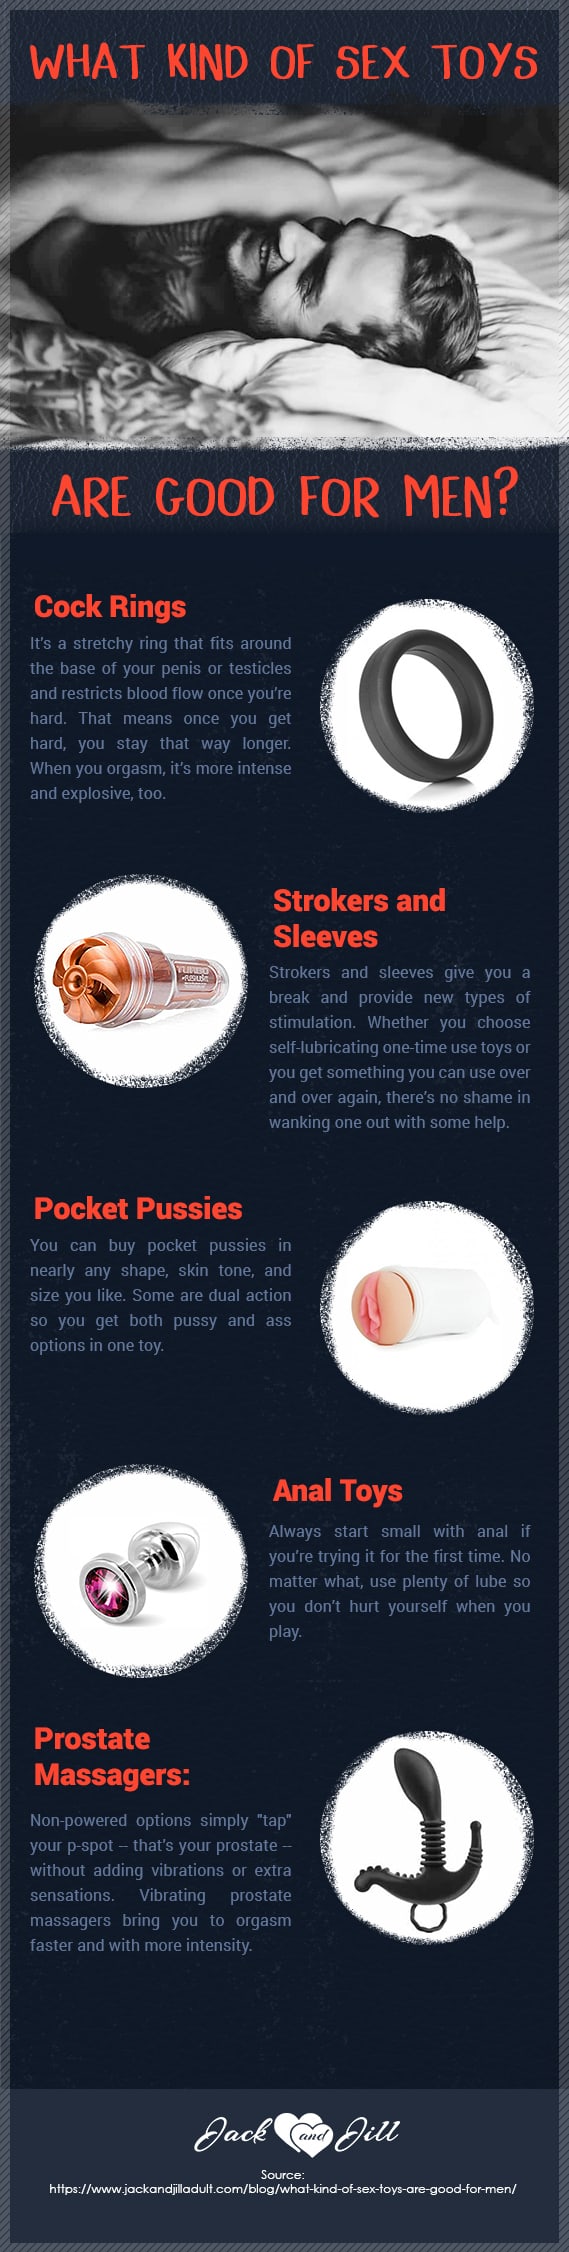 Infographic for What Kind of Sex Toys are Good For Men?